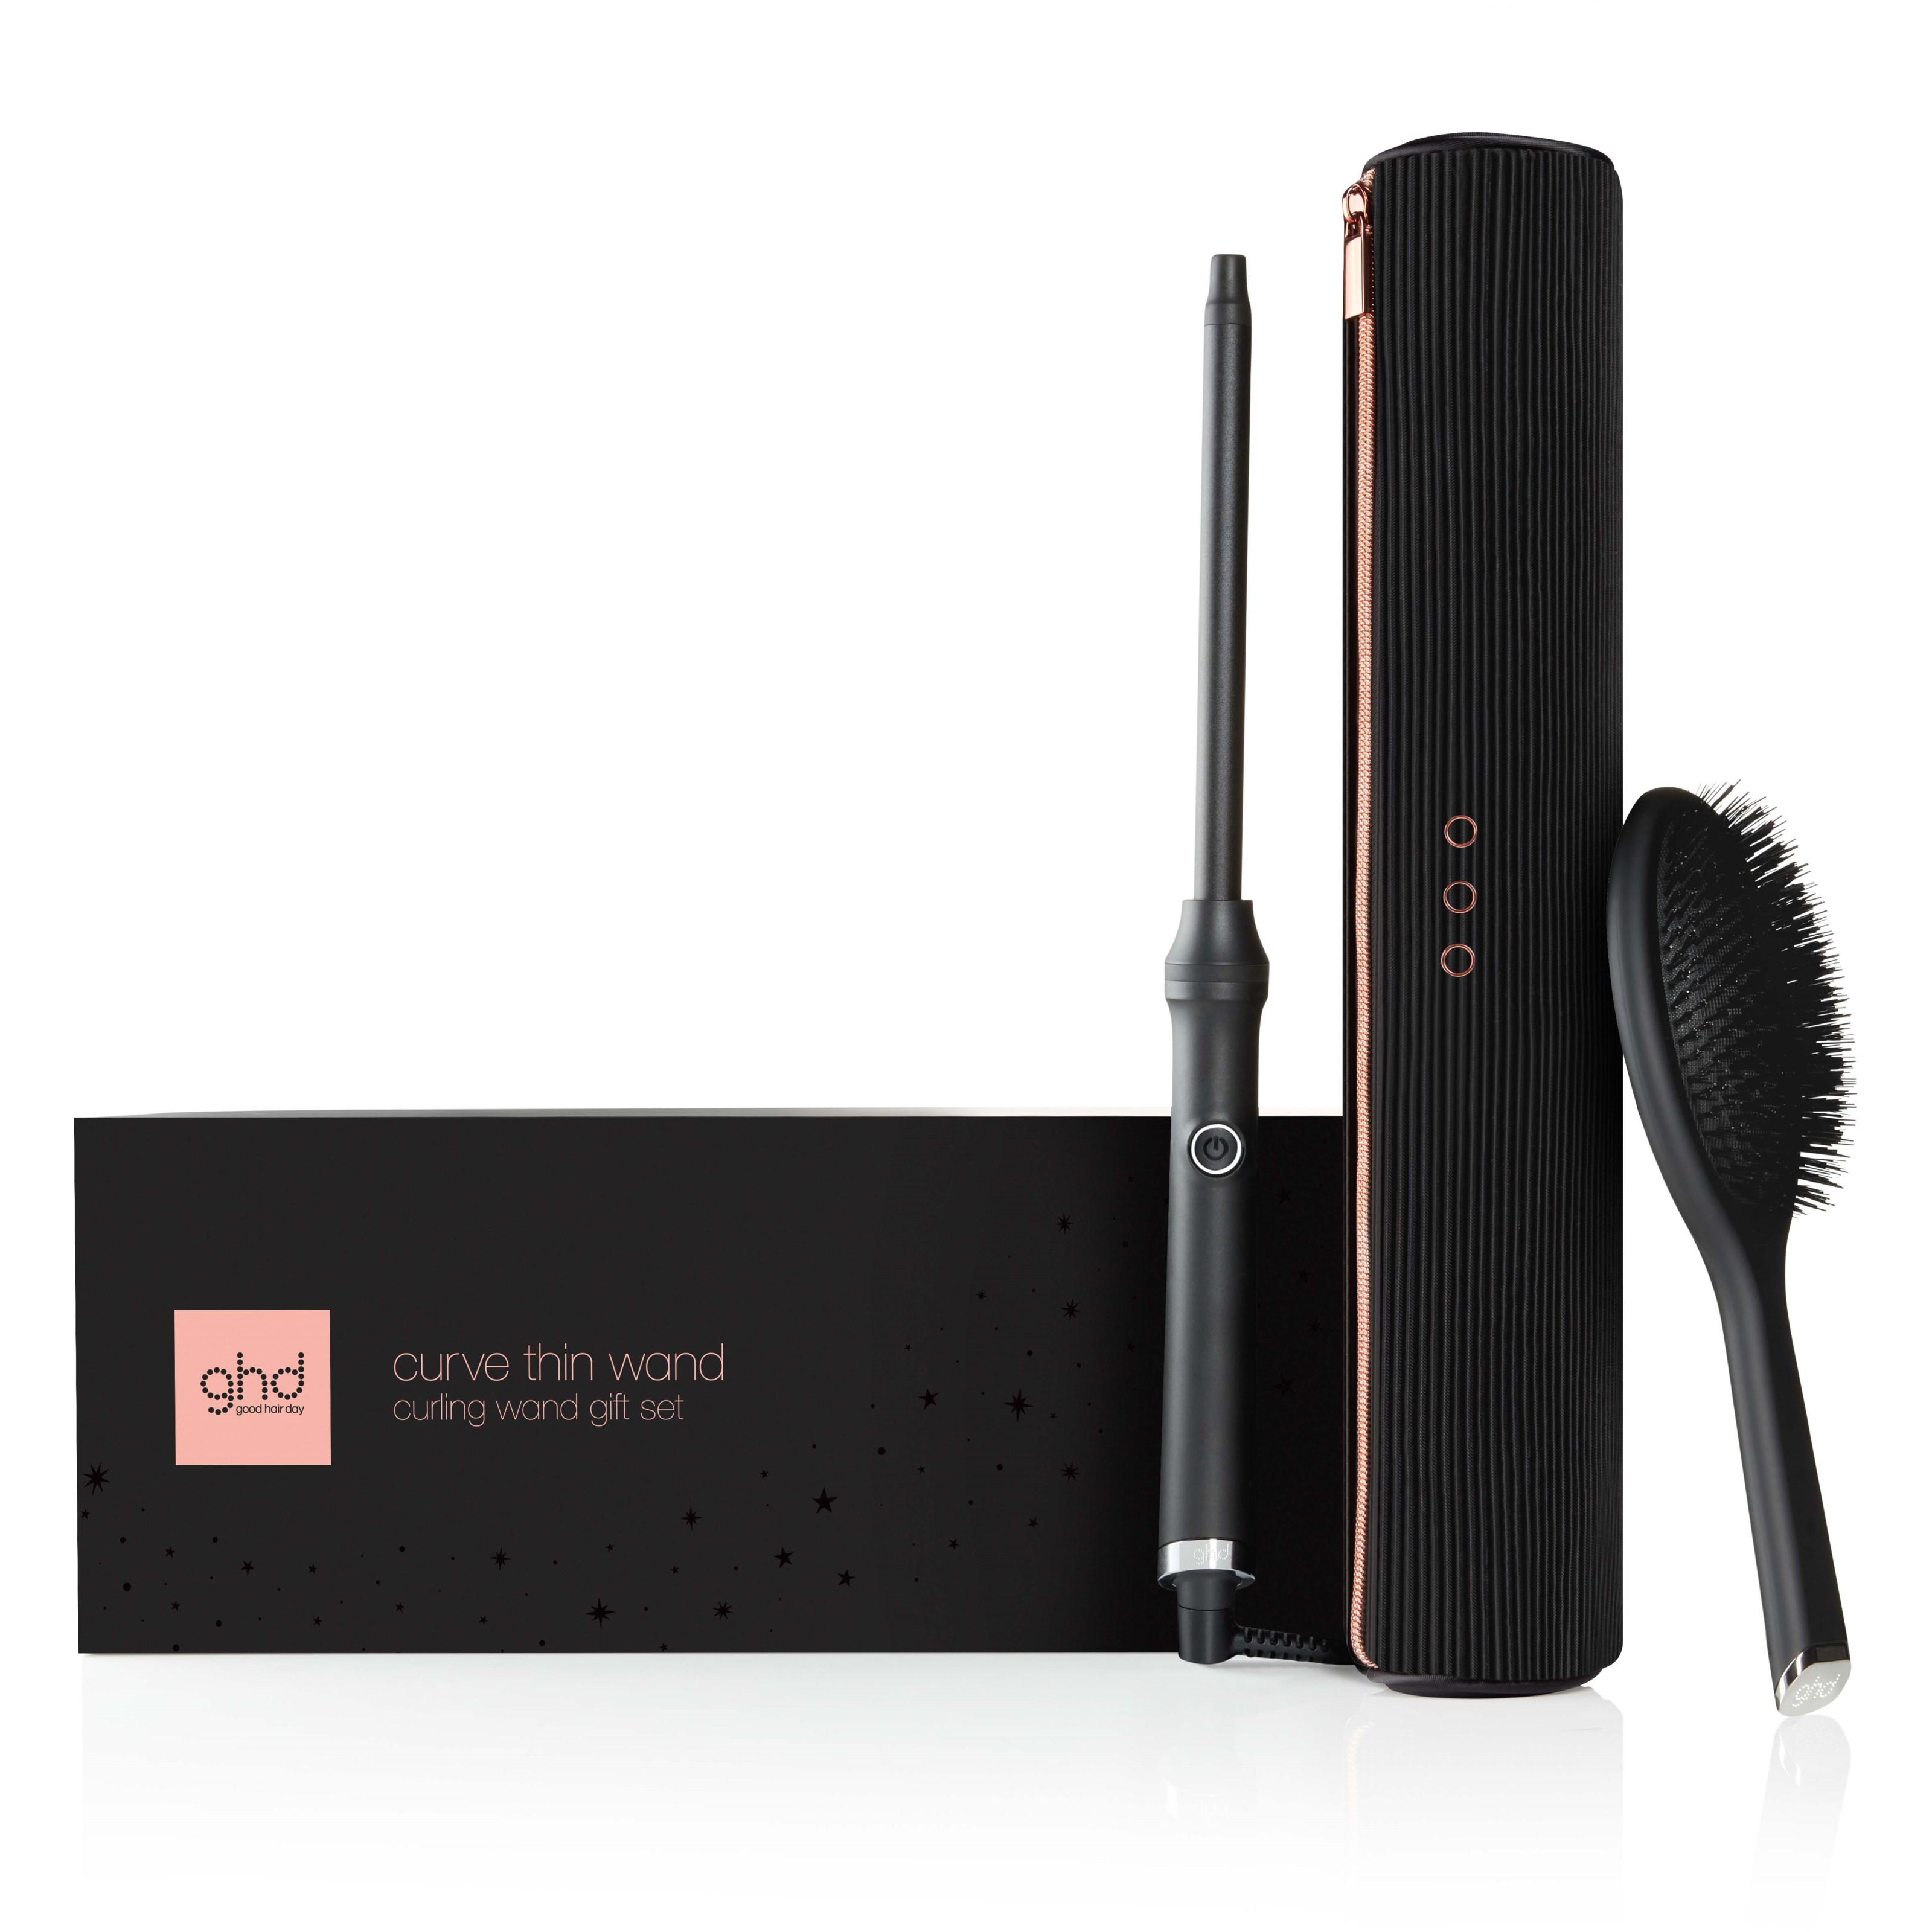 Läs mer om ghd Dreamland Holiday Collection Curve Thin Wand Gift Set